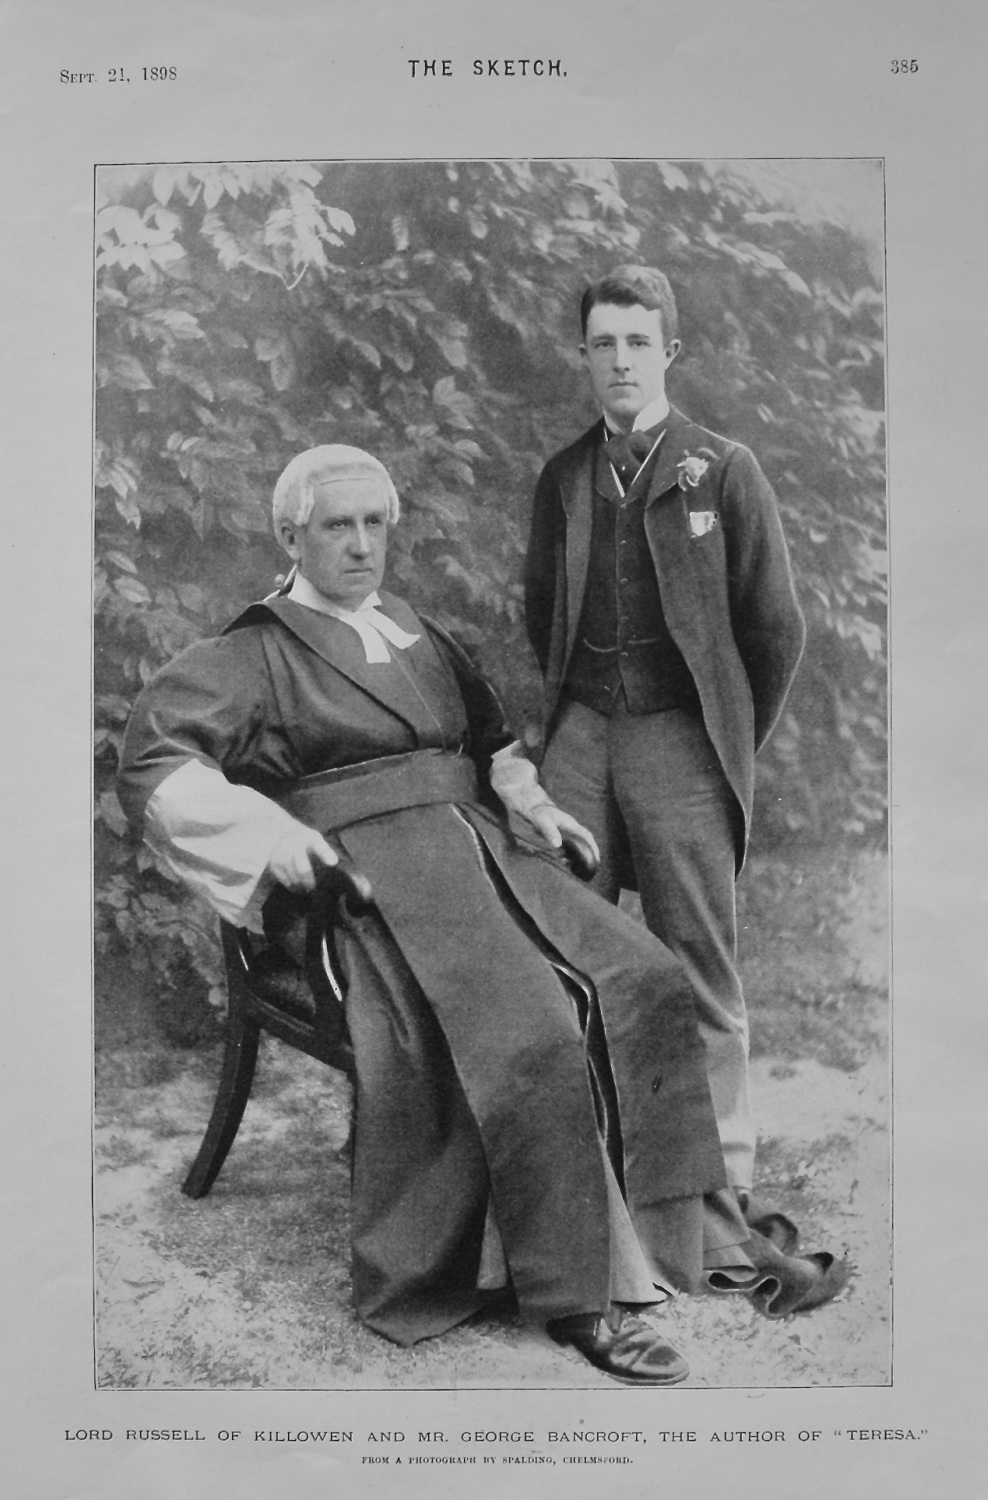 Lord Russell of Killowen and Mr. George Bancroft, the Author of 